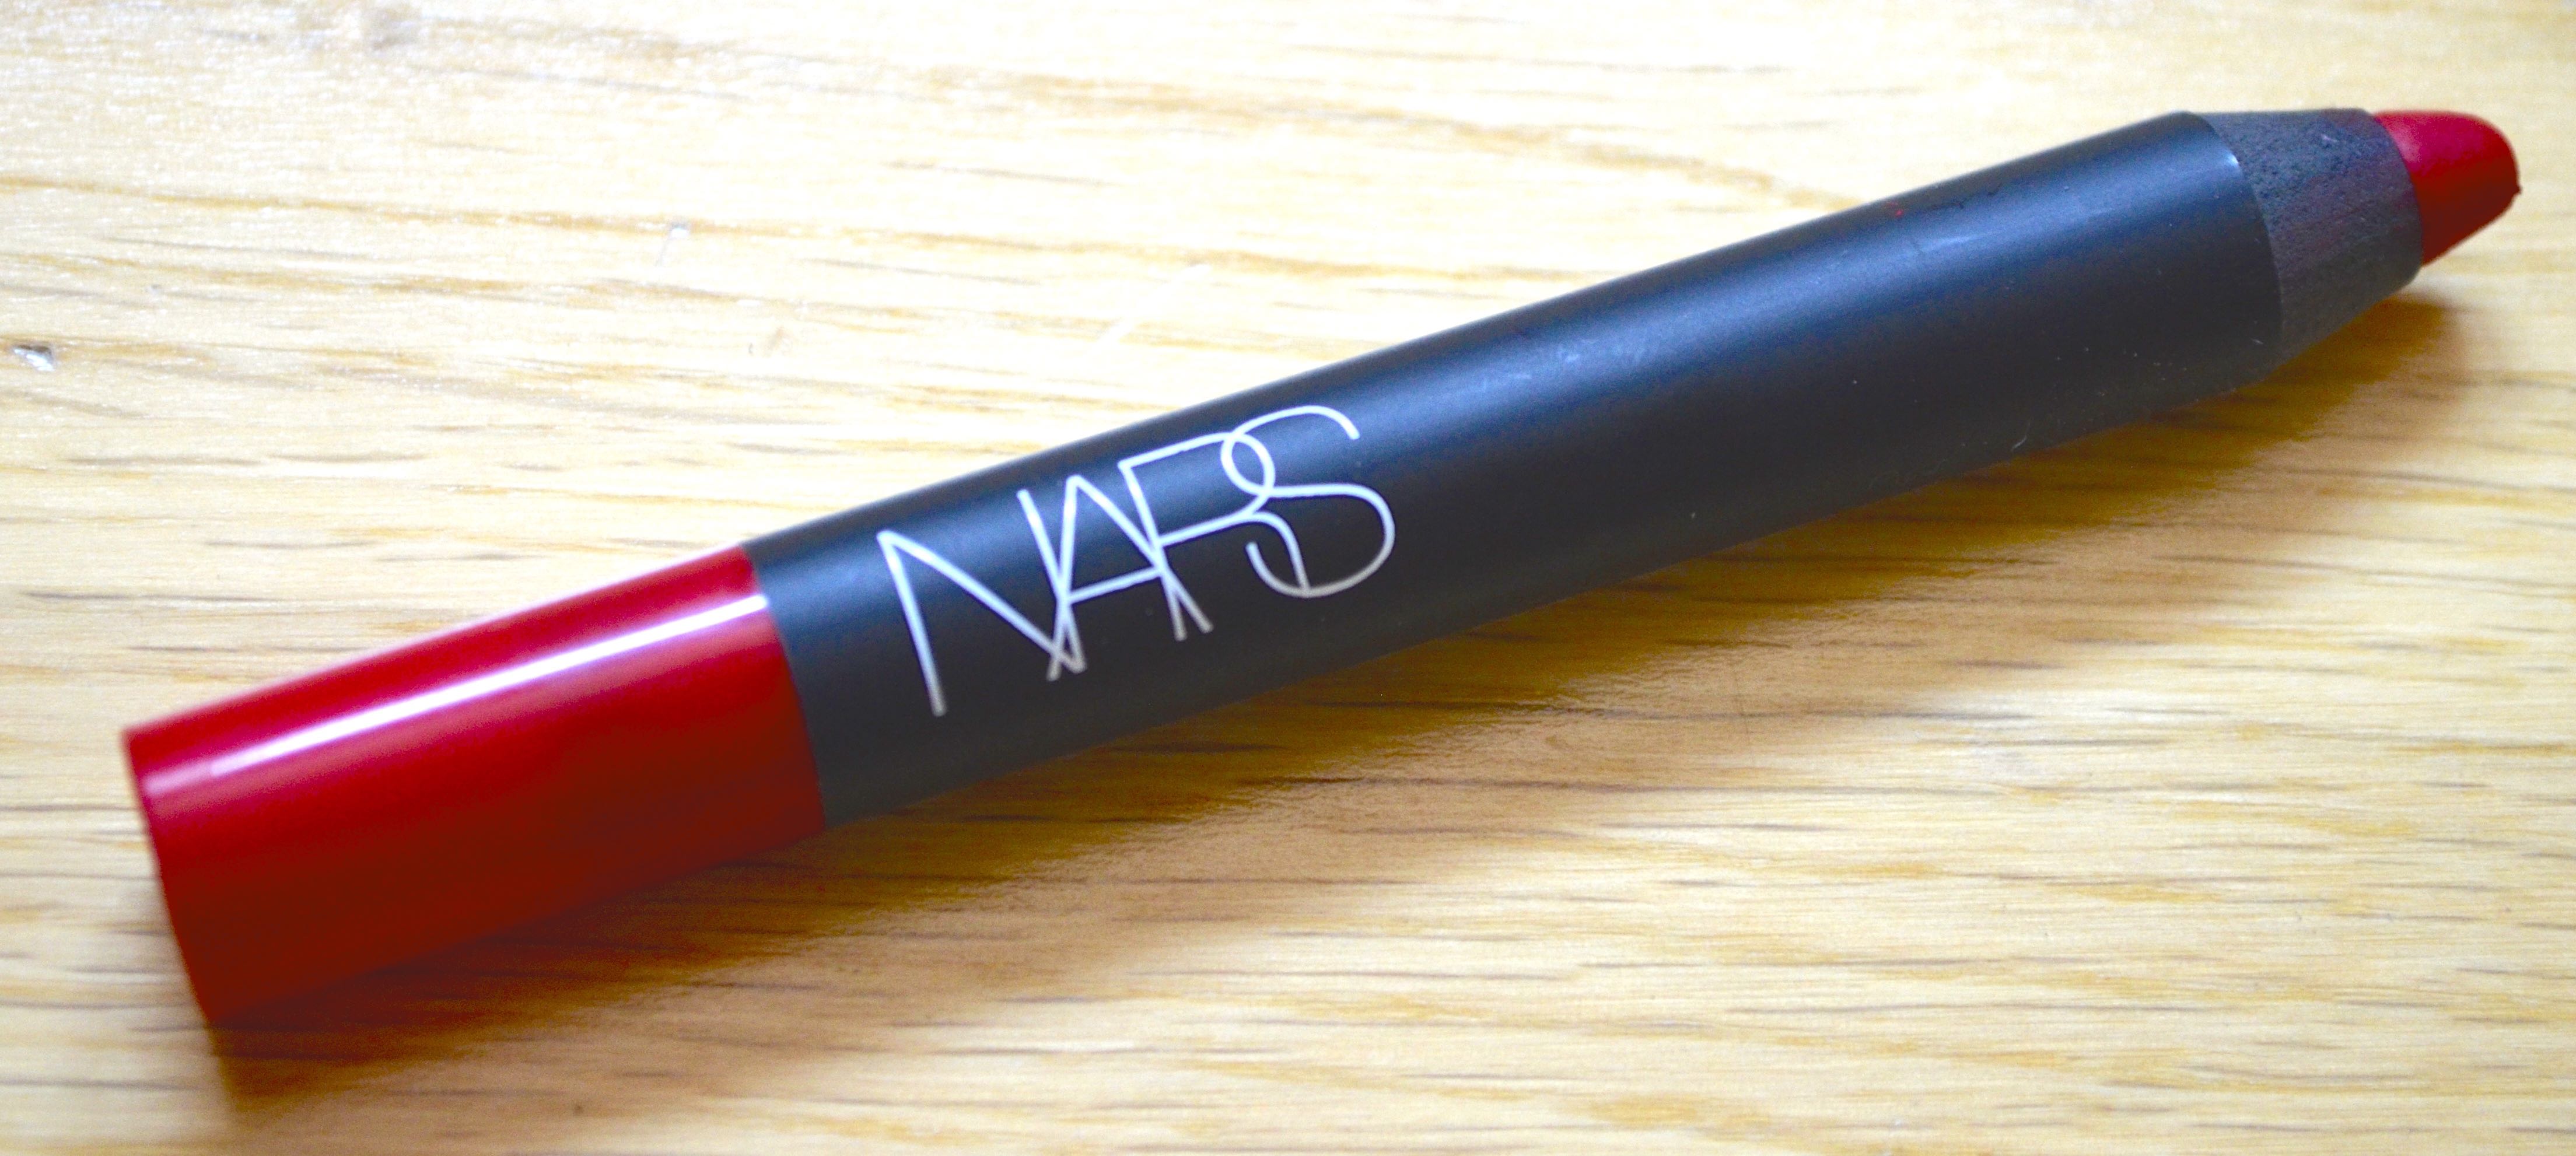 Nars lip pencil - Beauty Finds for the summer at www.laughlovekiss.com